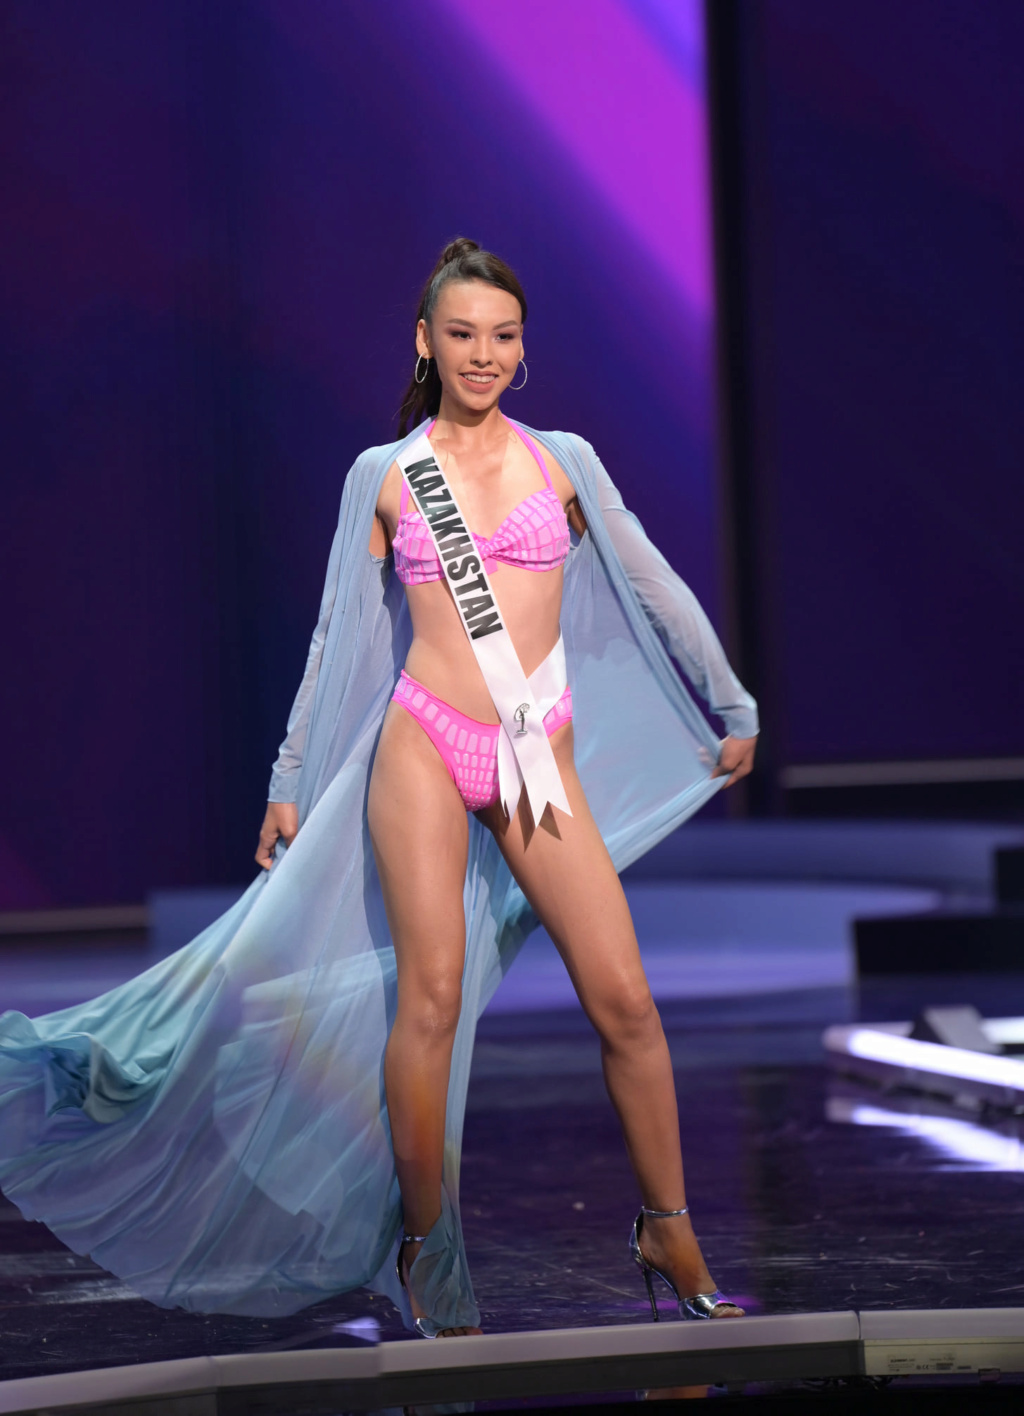 MISS UNIVERSE 2020 - PRELIMINARY COMPETITION 2231